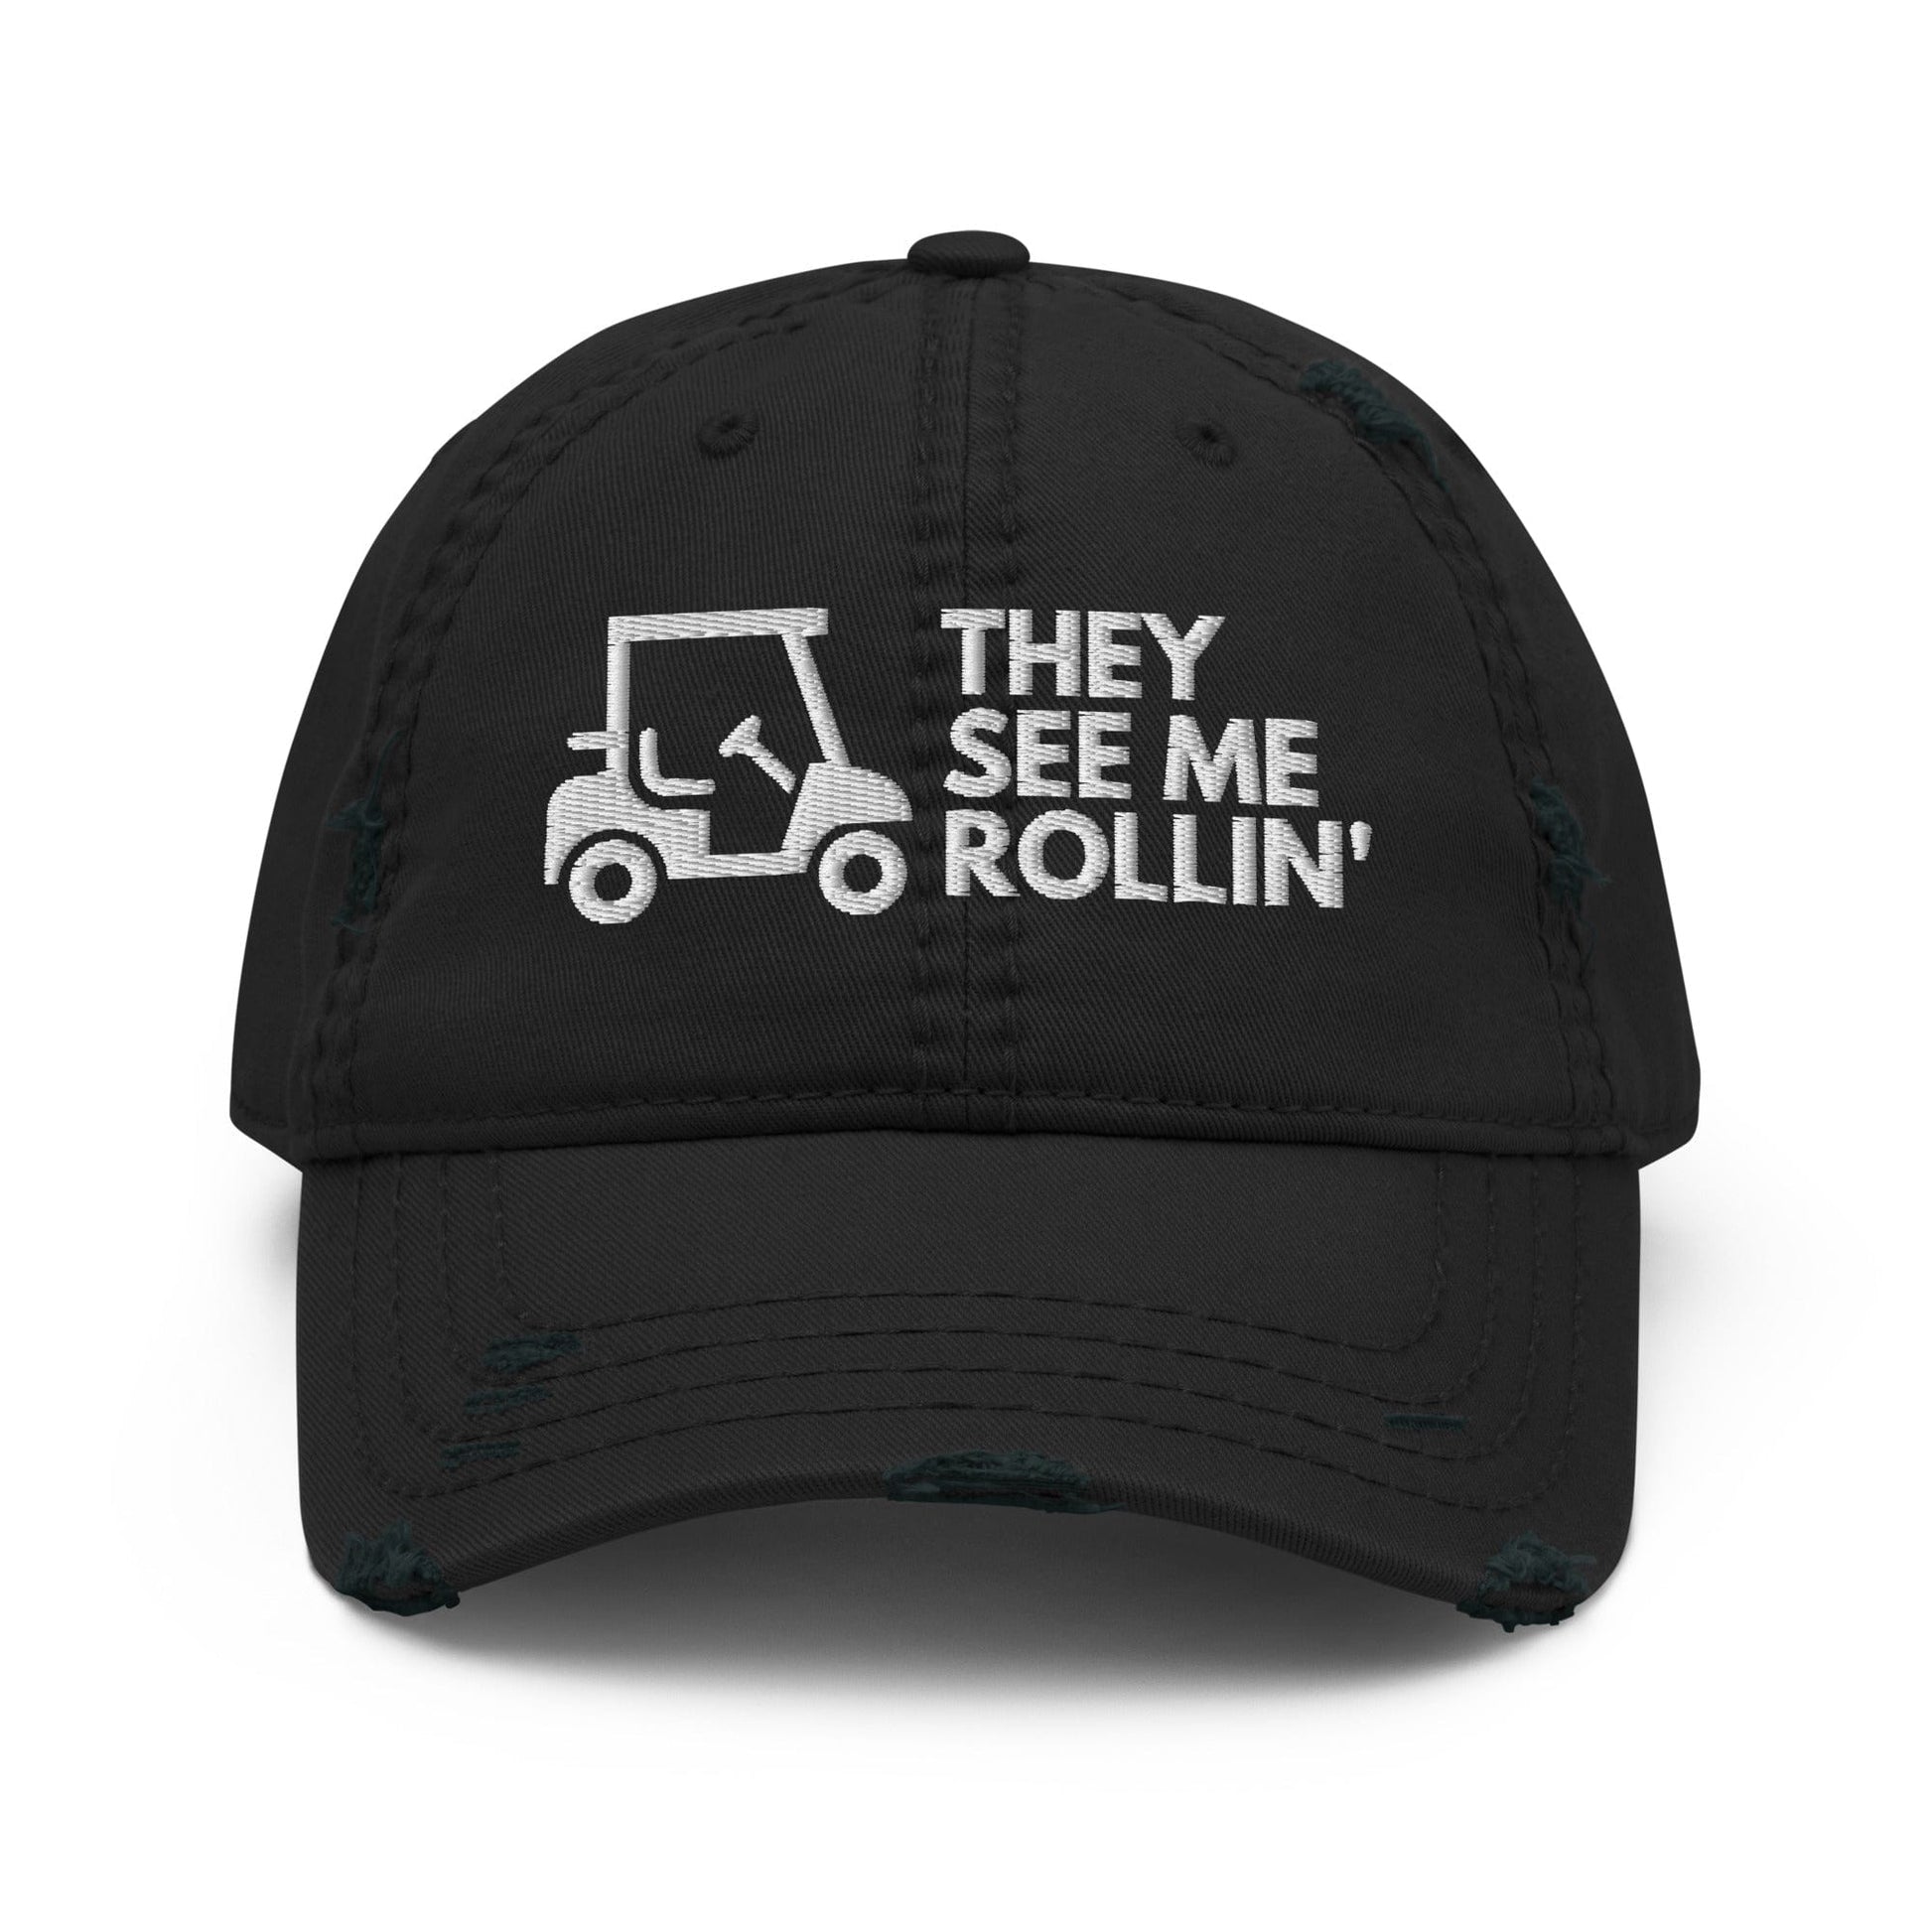 Funny Golfer Gifts  Distressed Cap Black They See Me Rollin Golfcart Hat Distressed Hat